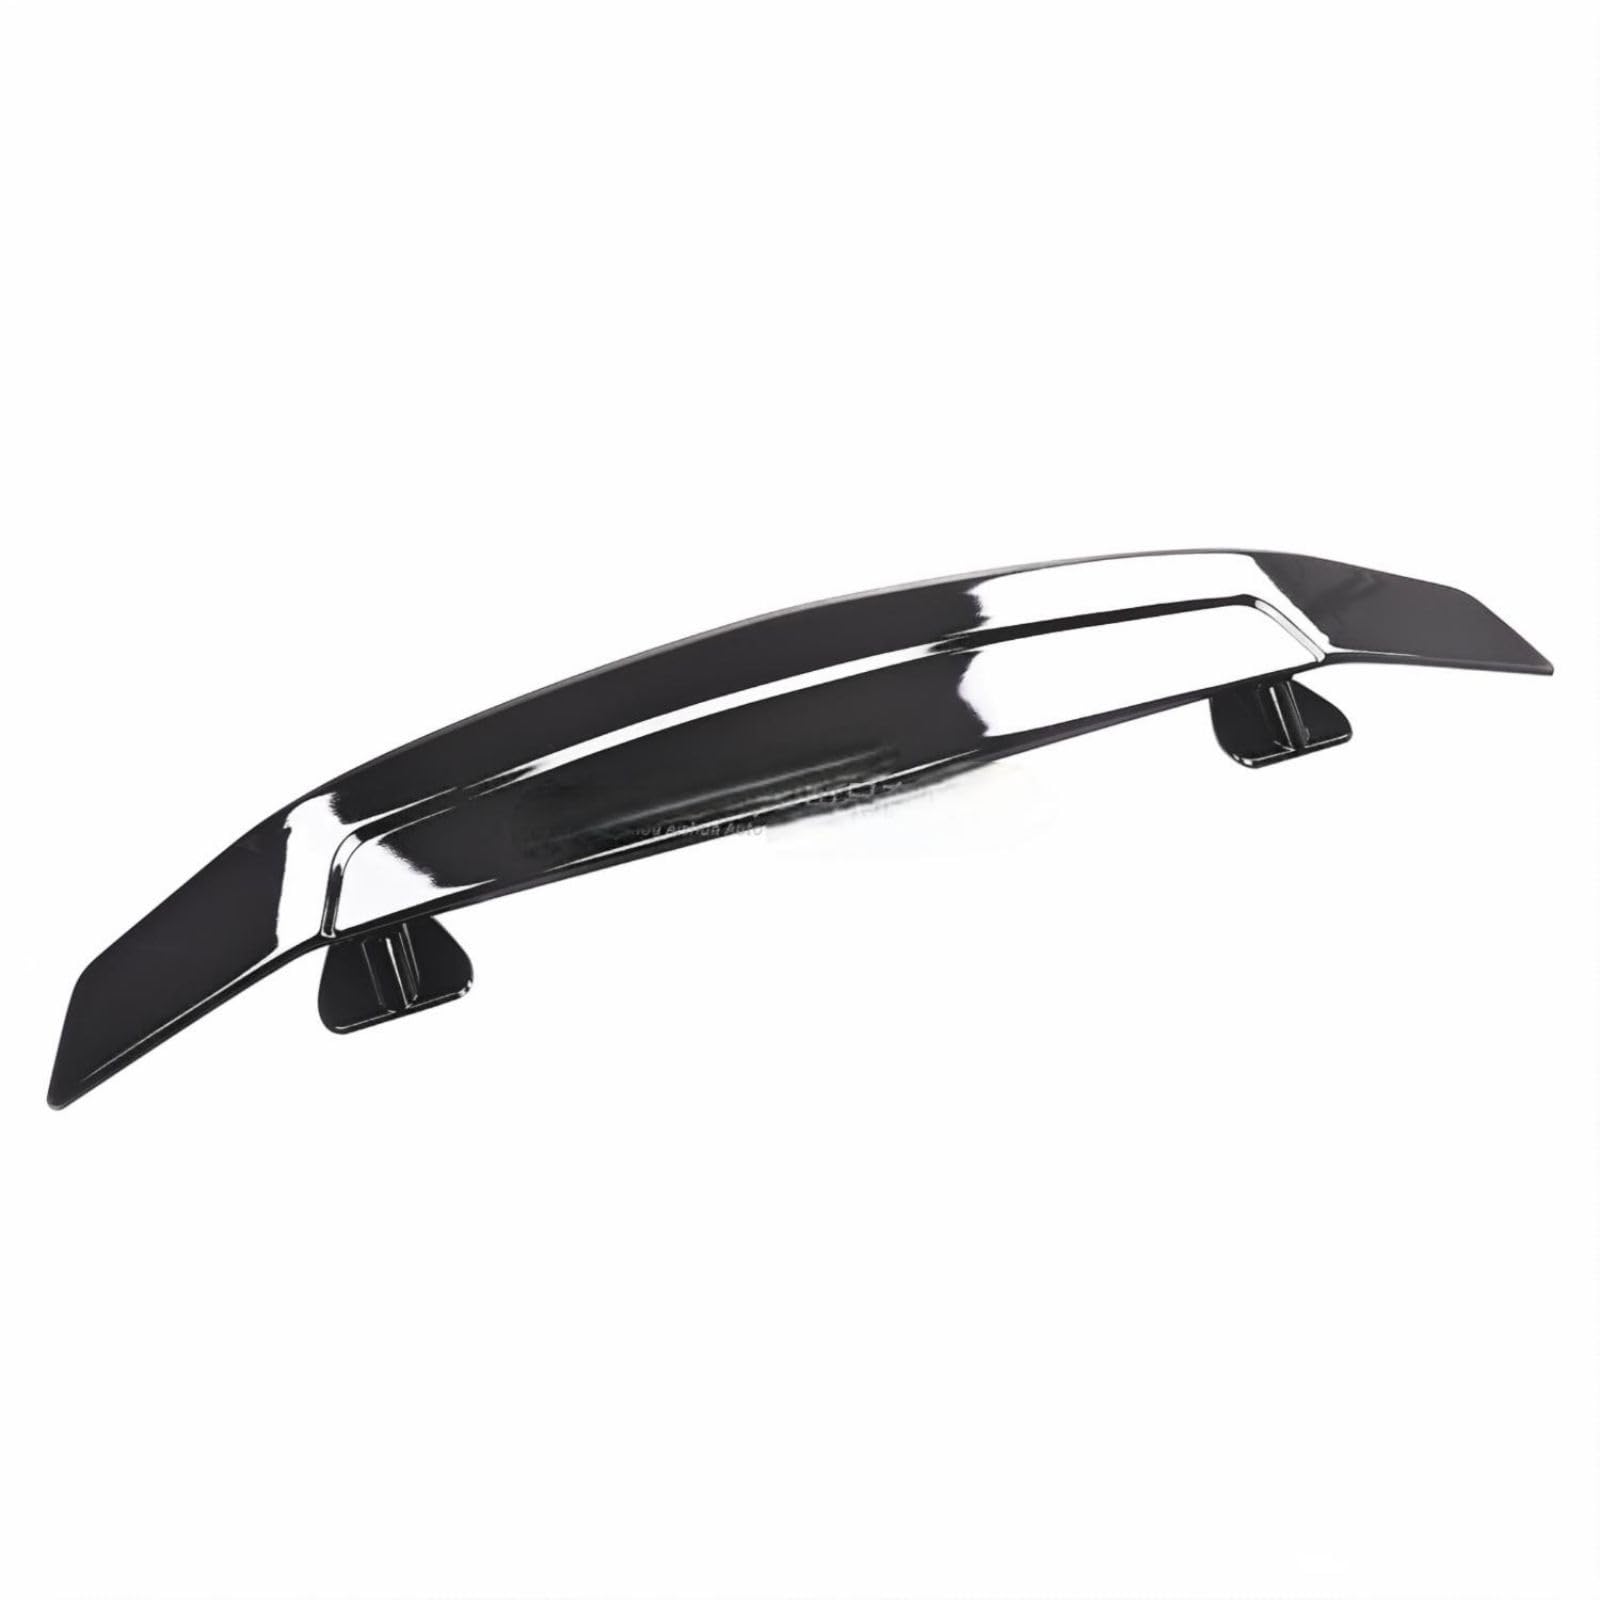 ABS Car Roof Spoiler für Nissan Altima IV Coupe 2007-2012, Boot Rear Spoiler Rear Wing Wing Lip Boot Spoiler Tuning Accessories,Bright Black von FFSWQAZ4A1